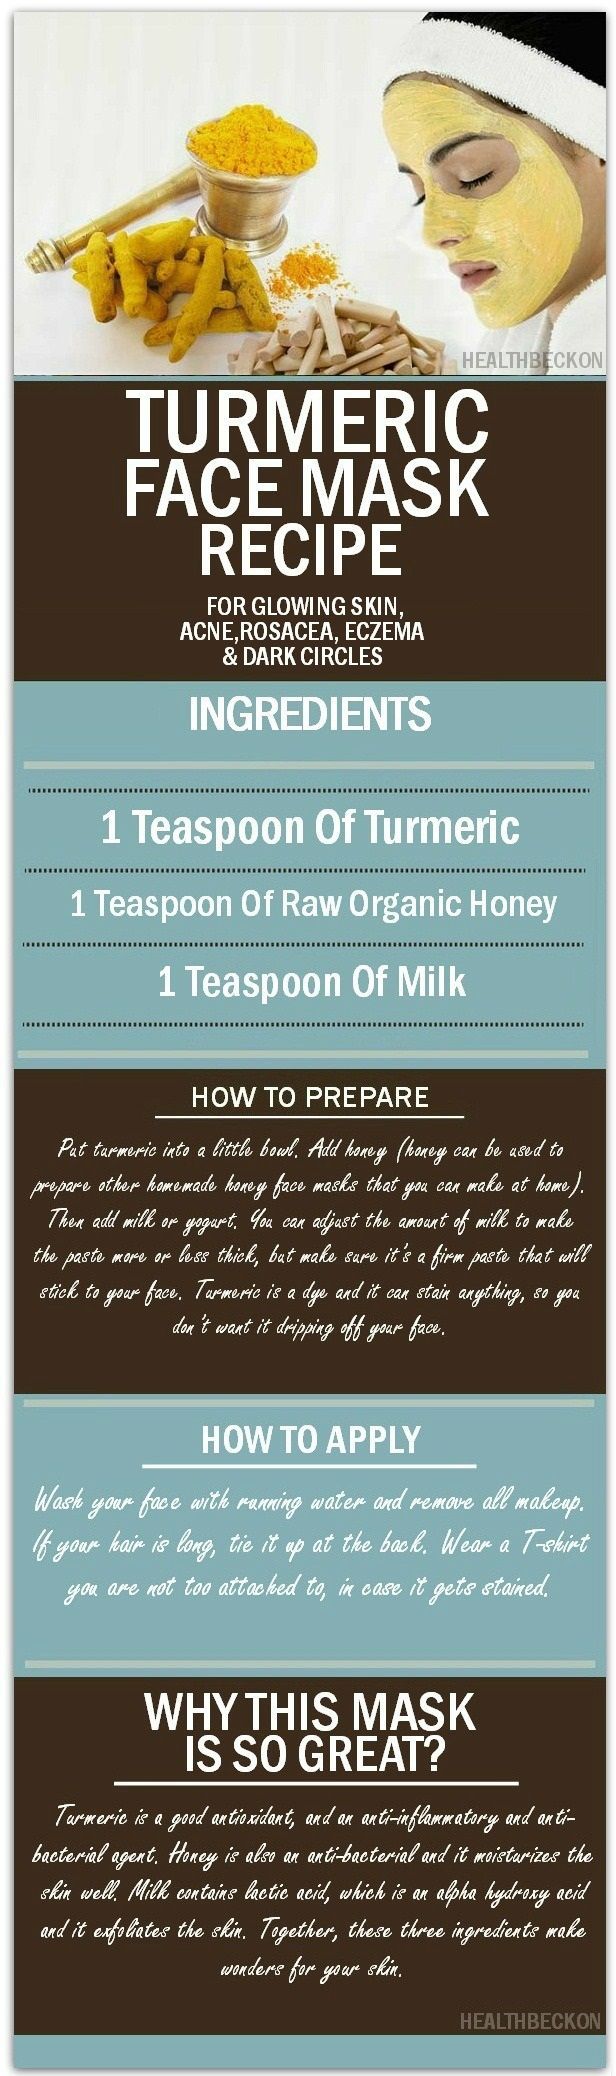 Turmeric Face Mask Recipe for Glowing Skin, Acne, Rosacea, Eczema and Dark Circl...